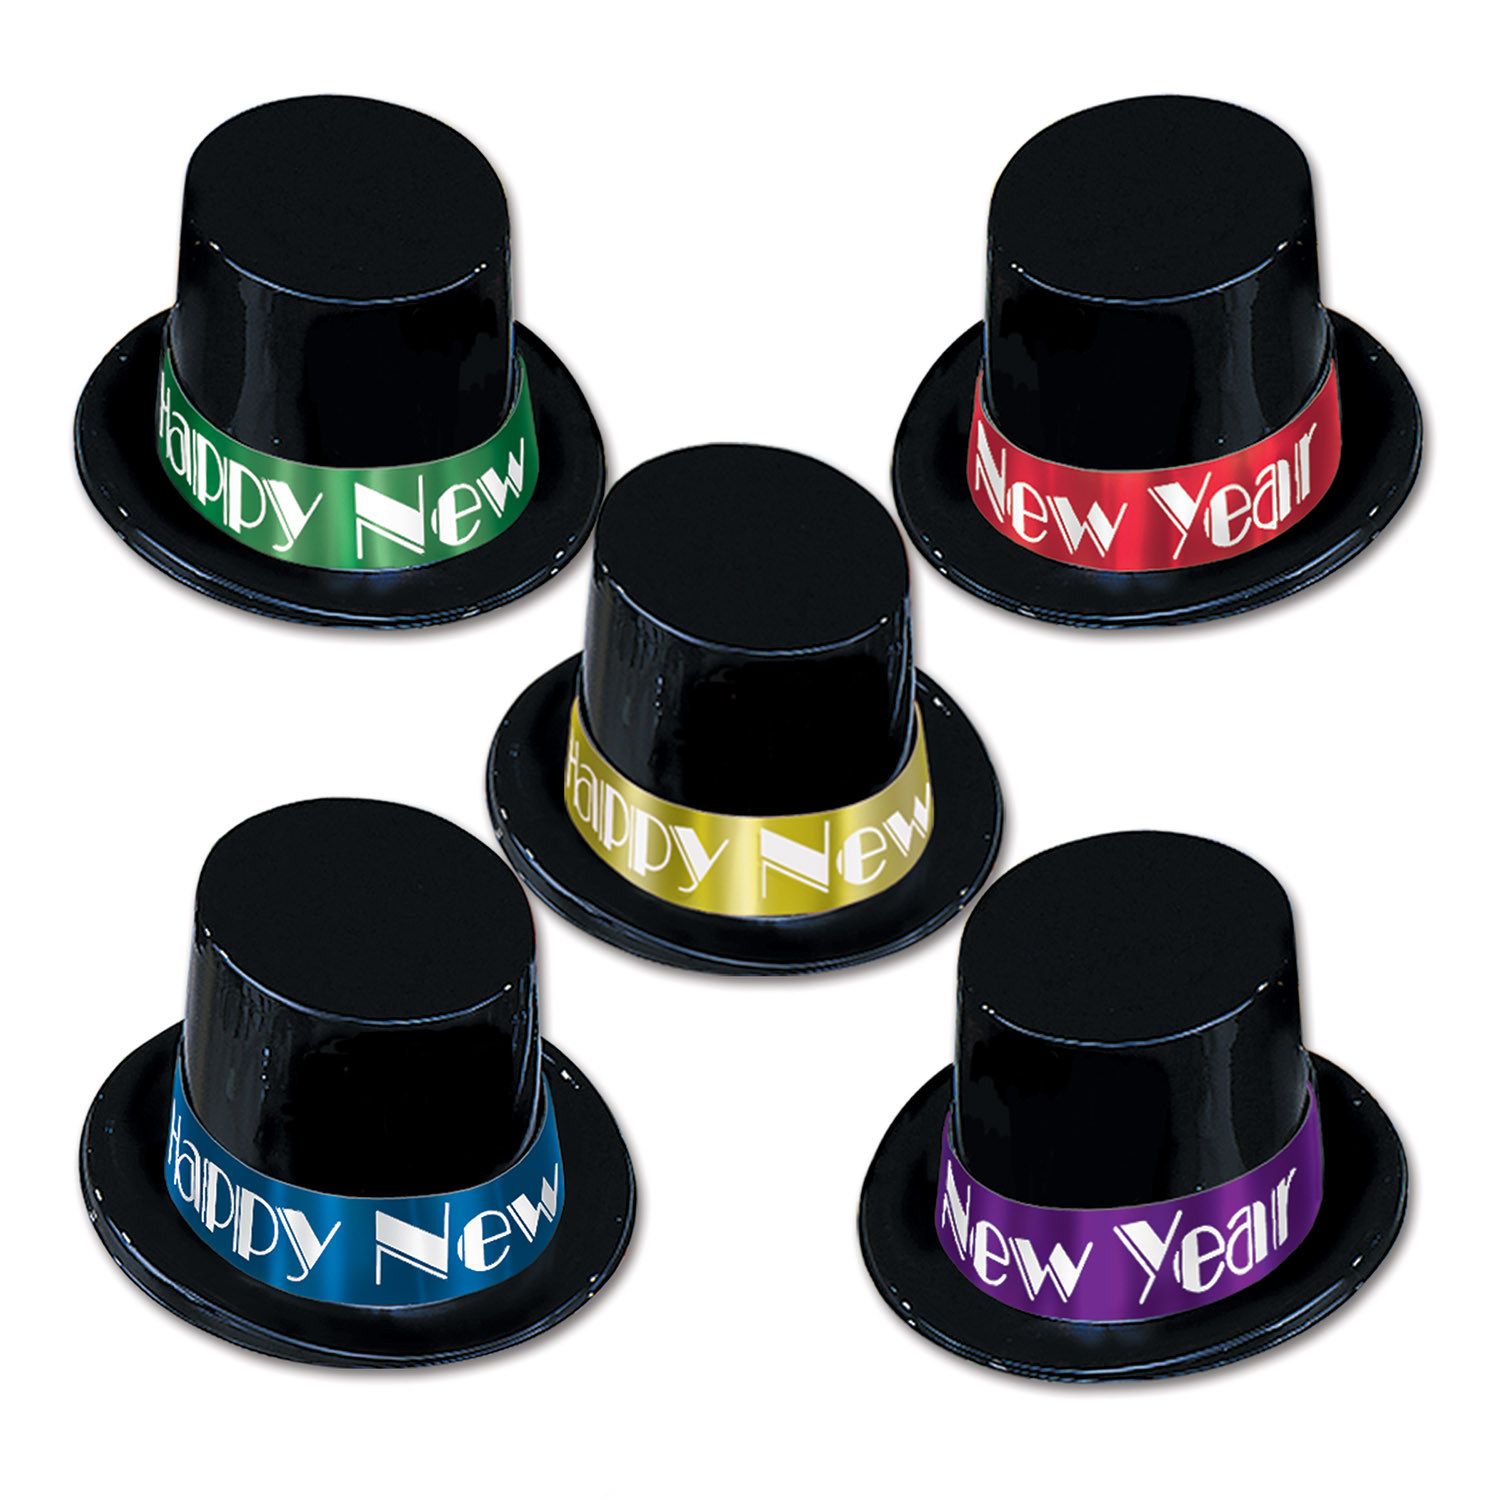 Black Top Hat with Multi-Color Happy New Year Bands